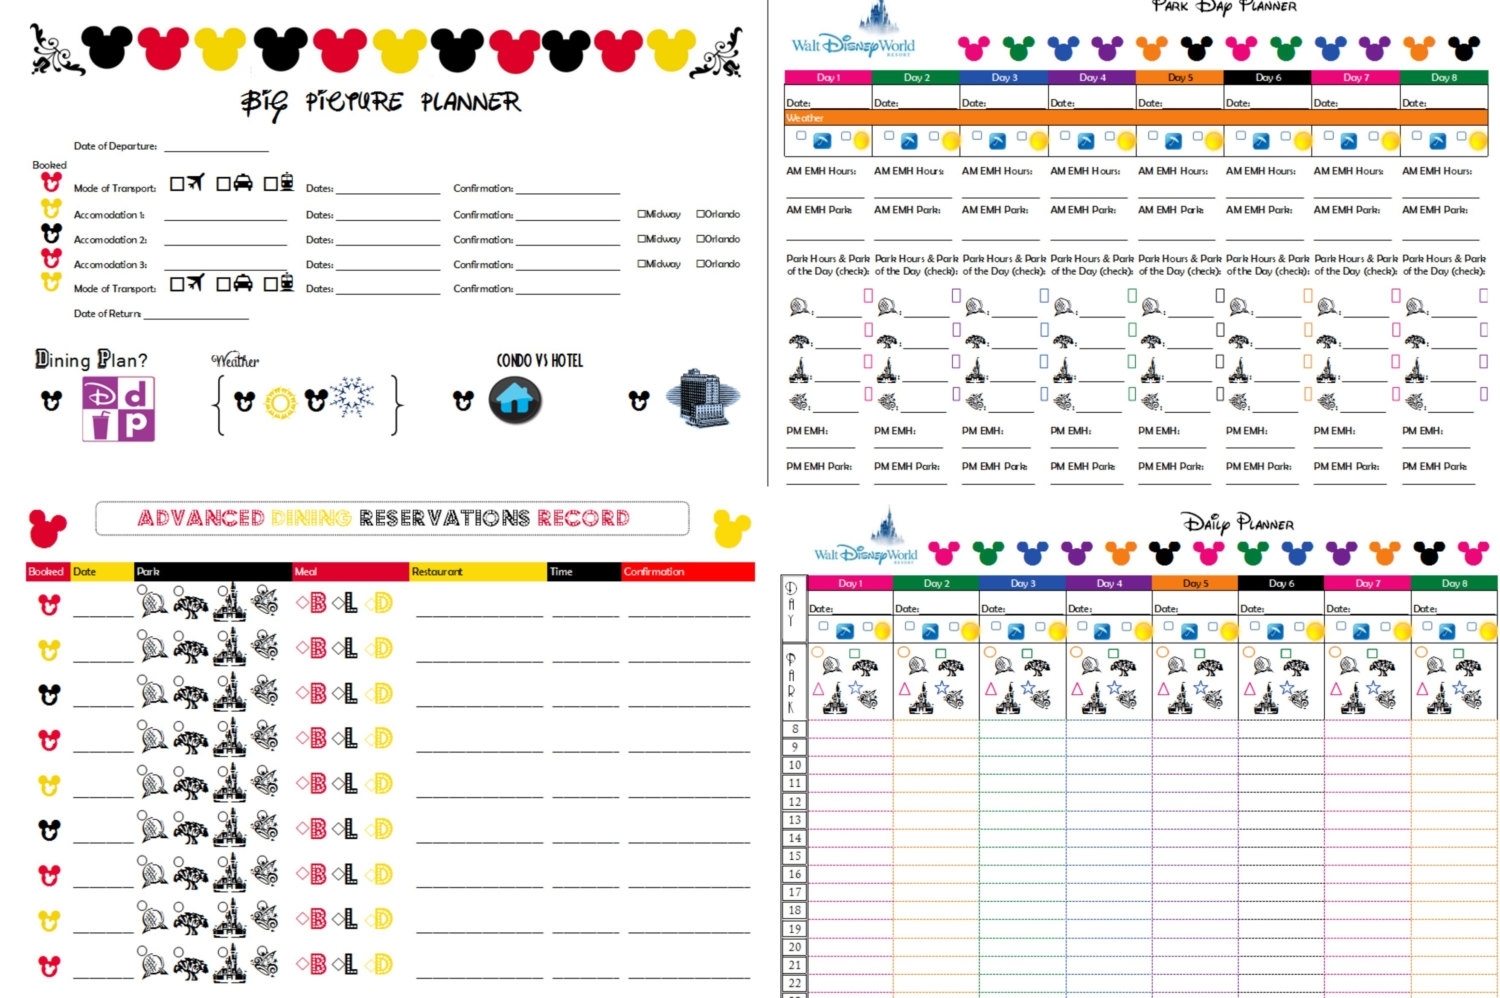 Disney Trip Planner Spreadsheet | Laobing Kaisuo intended for Disneyland Itinerary Template For Mac